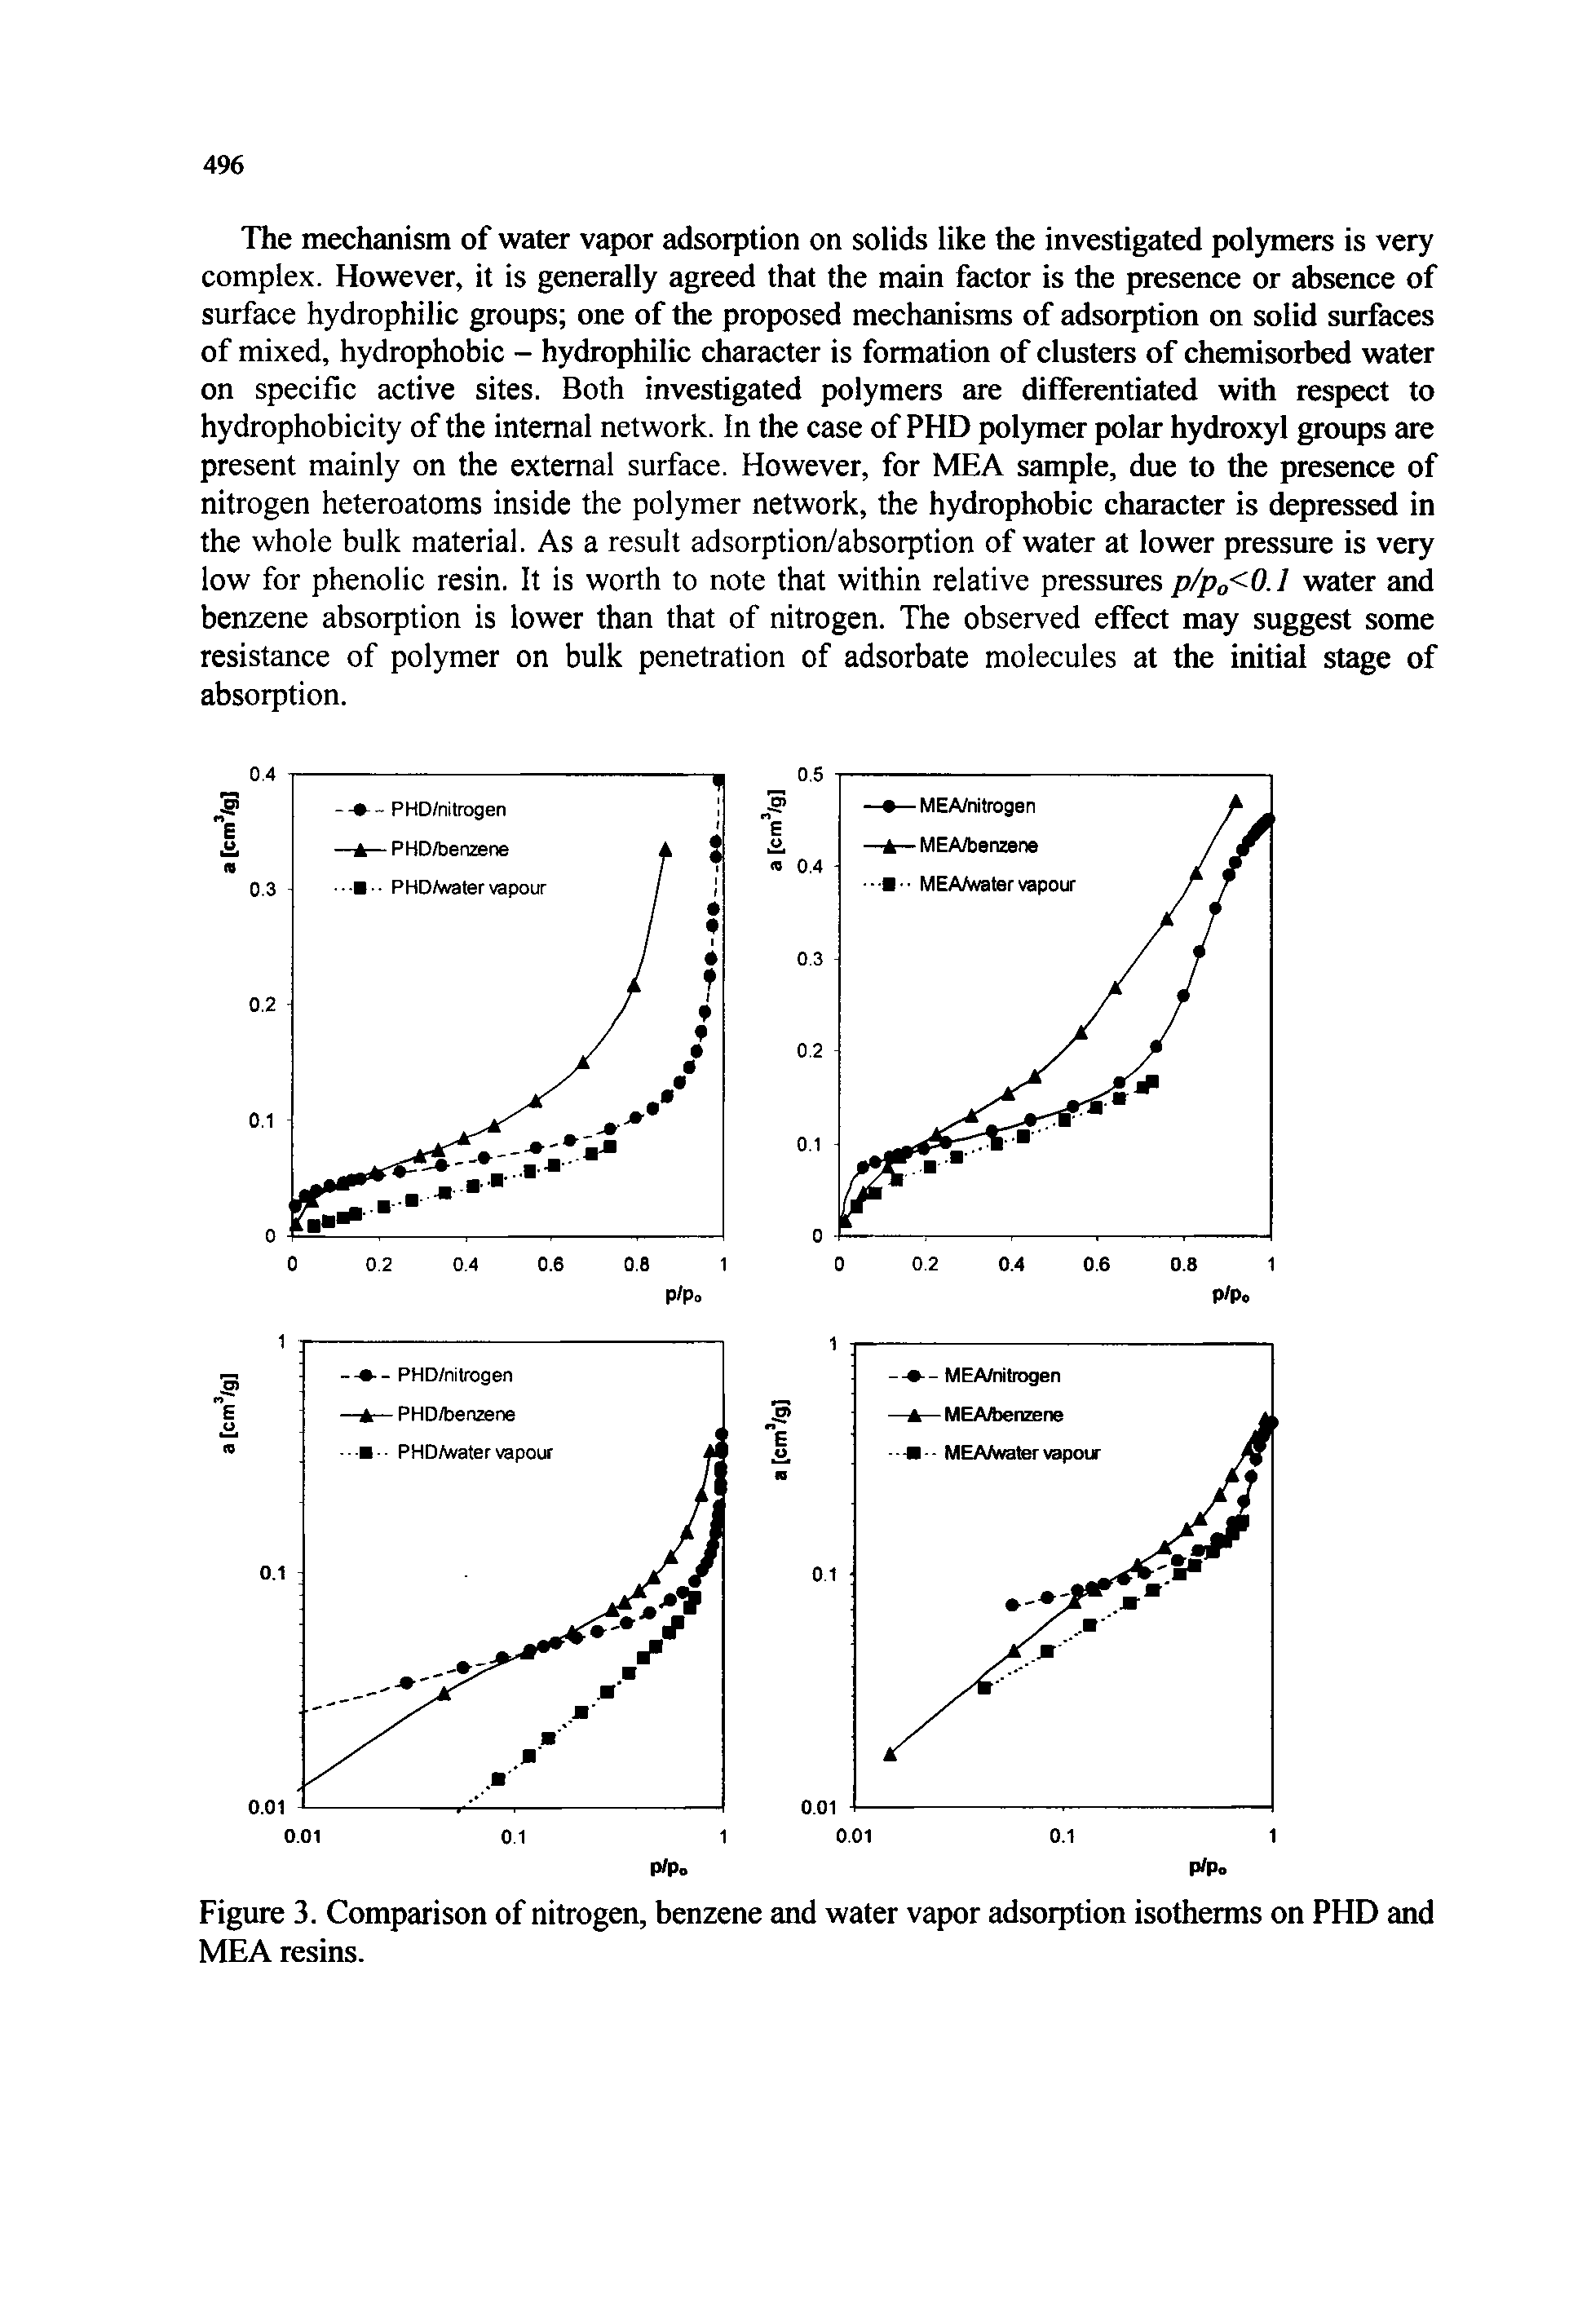 Figure 3. Comparison of nitrogen, benzene and water vapor adsorption isotherms on PHD and MEA resins.